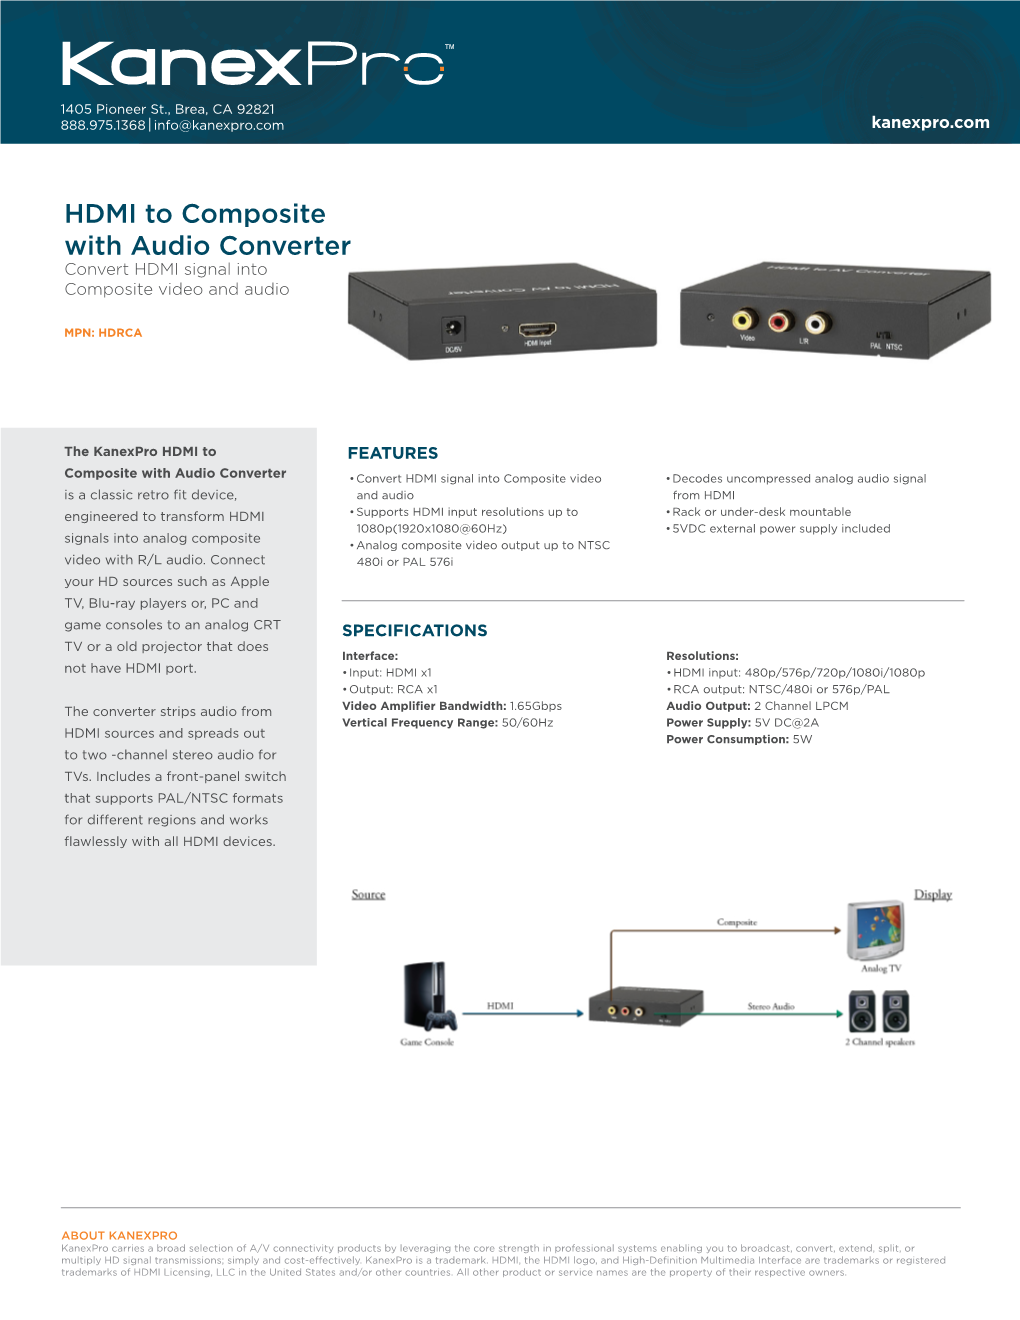 HDMI to Composite with Audio Converter Convert HDMI Signal Into Composite Video and Audio